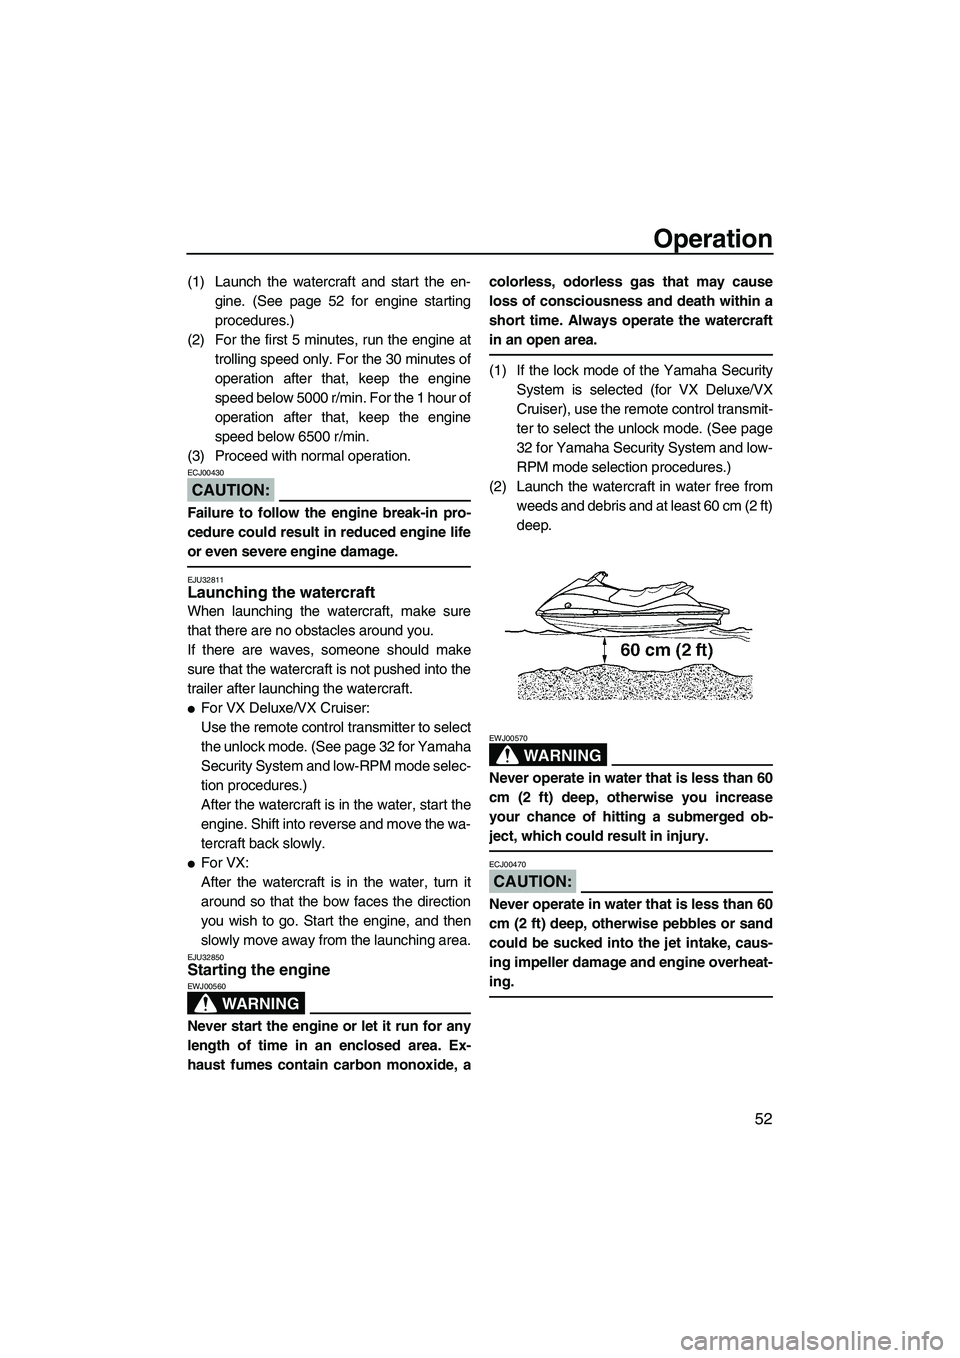 YAMAHA VX SPORT 2007  Owners Manual Operation
52
(1) Launch the watercraft and start the en-
gine. (See page 52 for engine starting
procedures.)
(2) For the first 5 minutes, run the engine at
trolling speed only. For the 30 minutes of
o